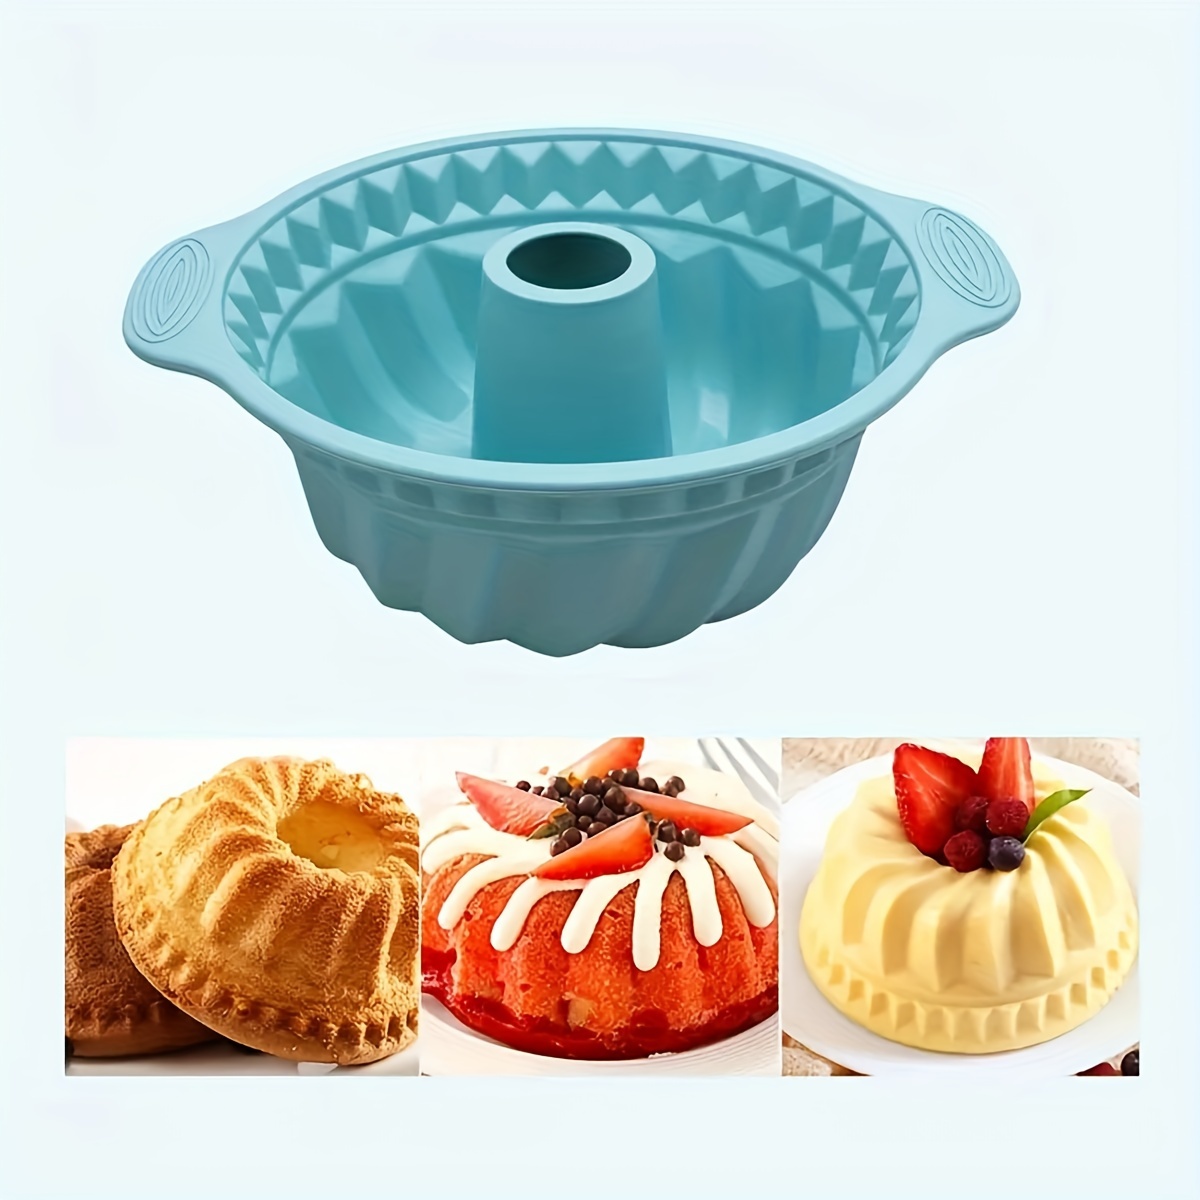 5 Piece Non-Stick Silicone Cake Baking Set with Baking Tray, Donuts, Toast  Molds, Round Cake Pan, 5-in-1 High Temperature Resistant Silicone Baking  Mold, Kitchen Utensils Baking Supplies Halloween Christmas Party Favor